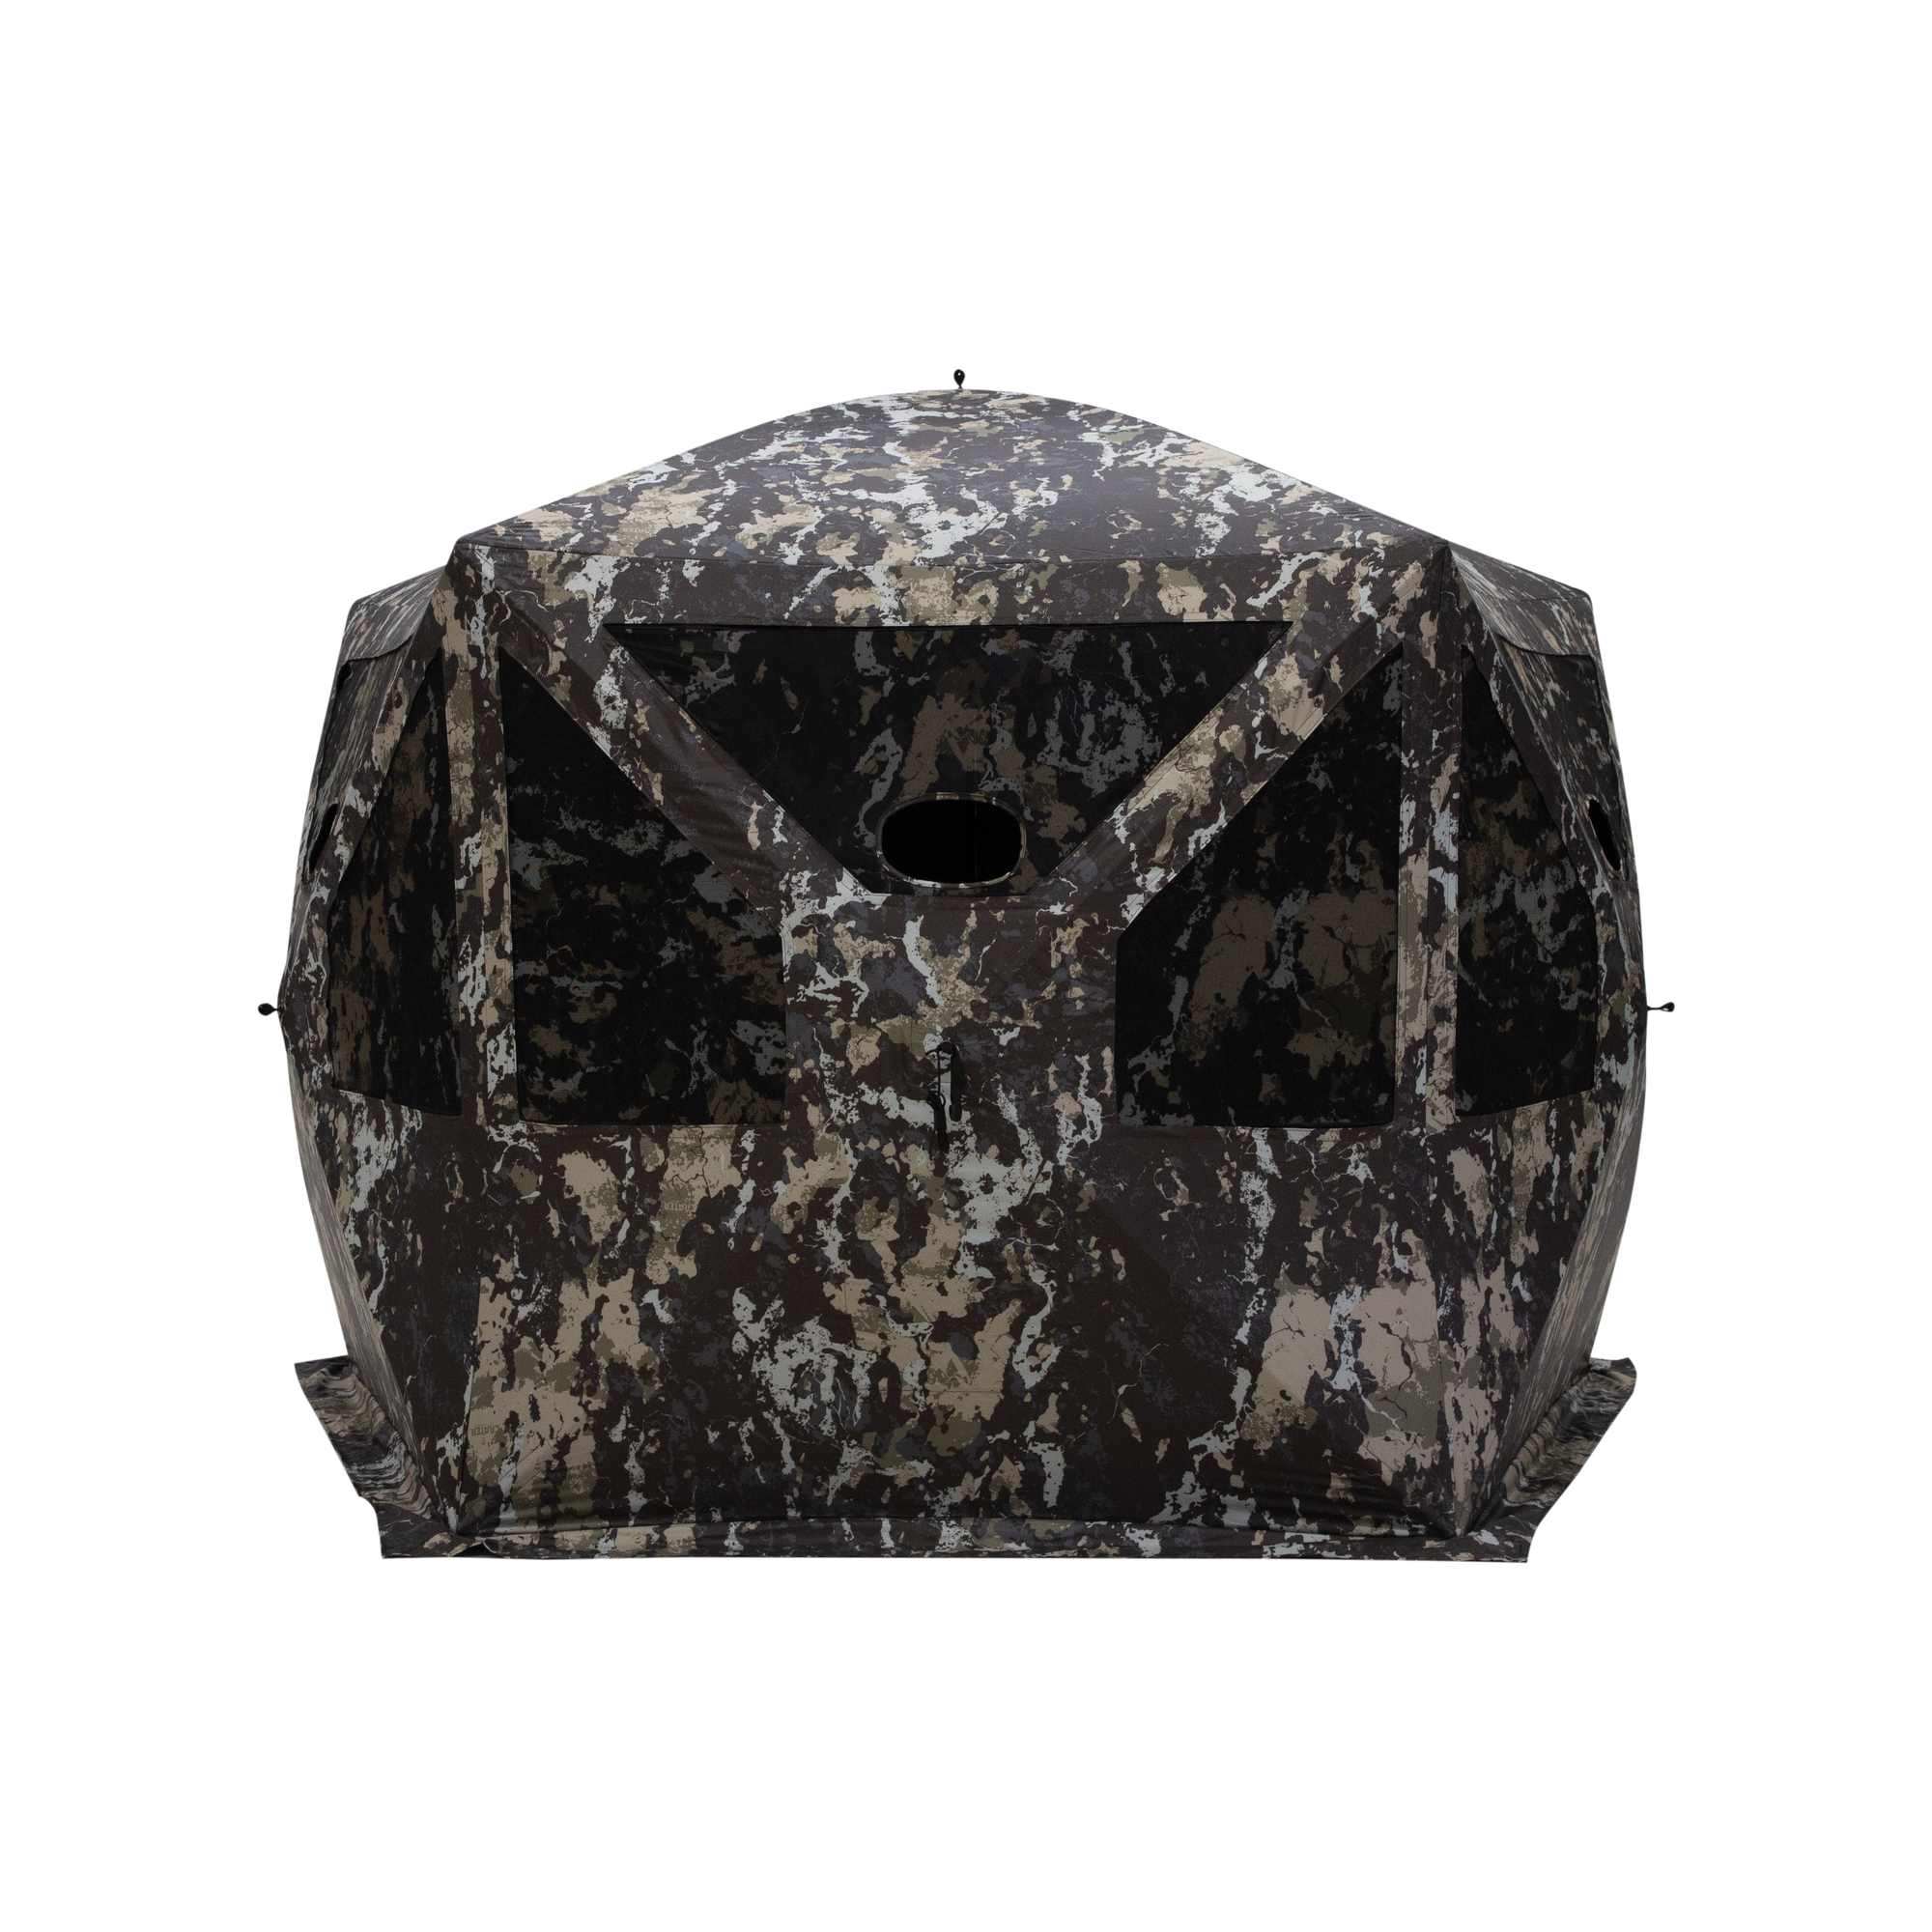 Barronett Blinds, Pentagon Portable Hunting Blind, 4-Person Capacity, Color Camouflage, Material Polyester, Model PT550CC